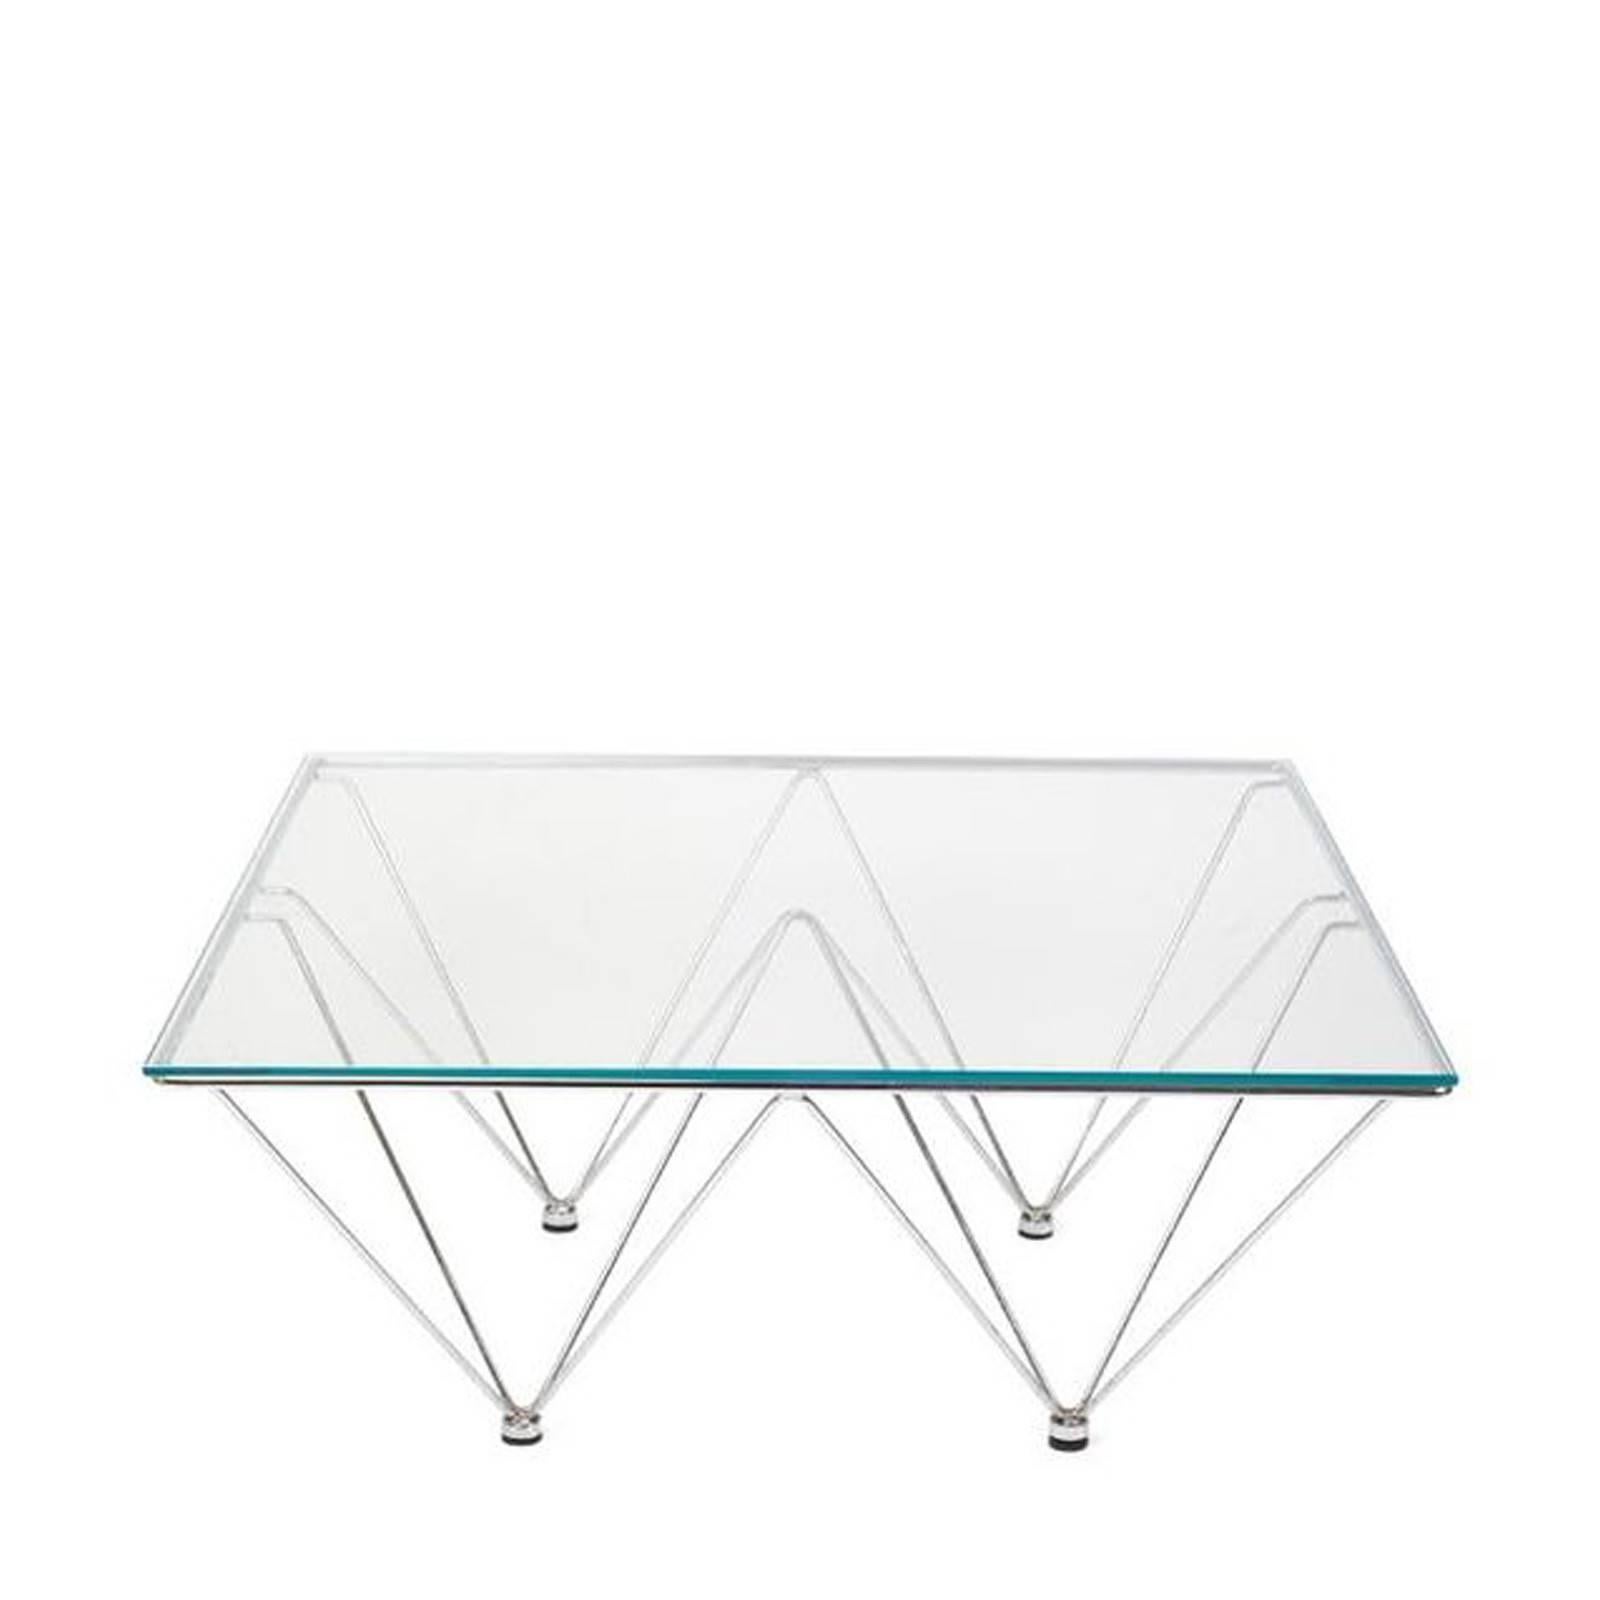 Paolo Piva style coffee table with new glass top. Sculptural chrome base has slight wear.